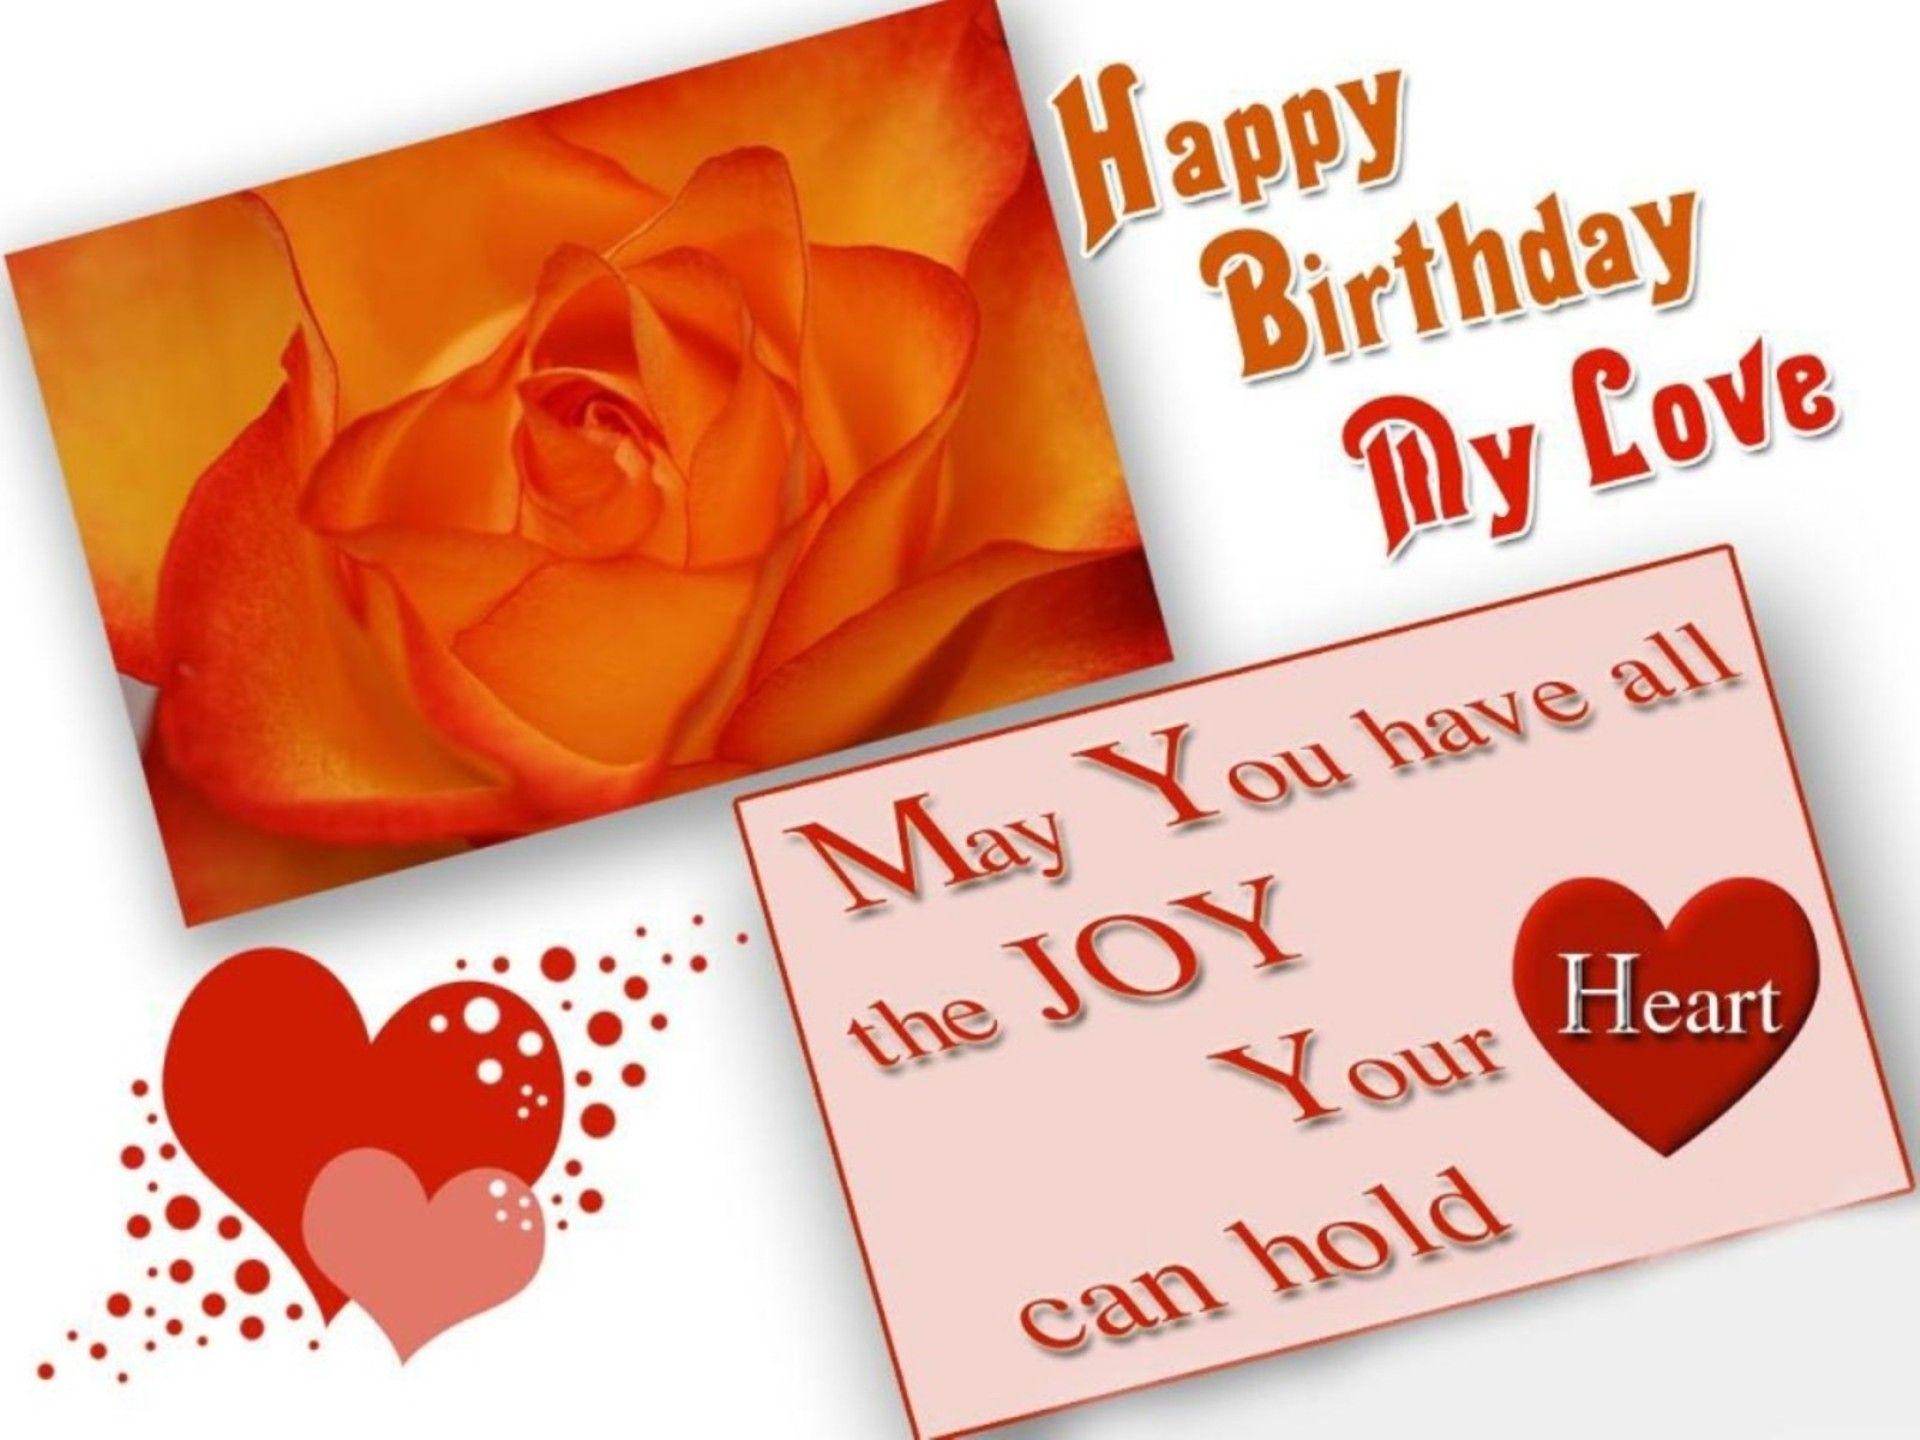 The Collection of Romantic Birthday Wishes That Can Make Your Wife